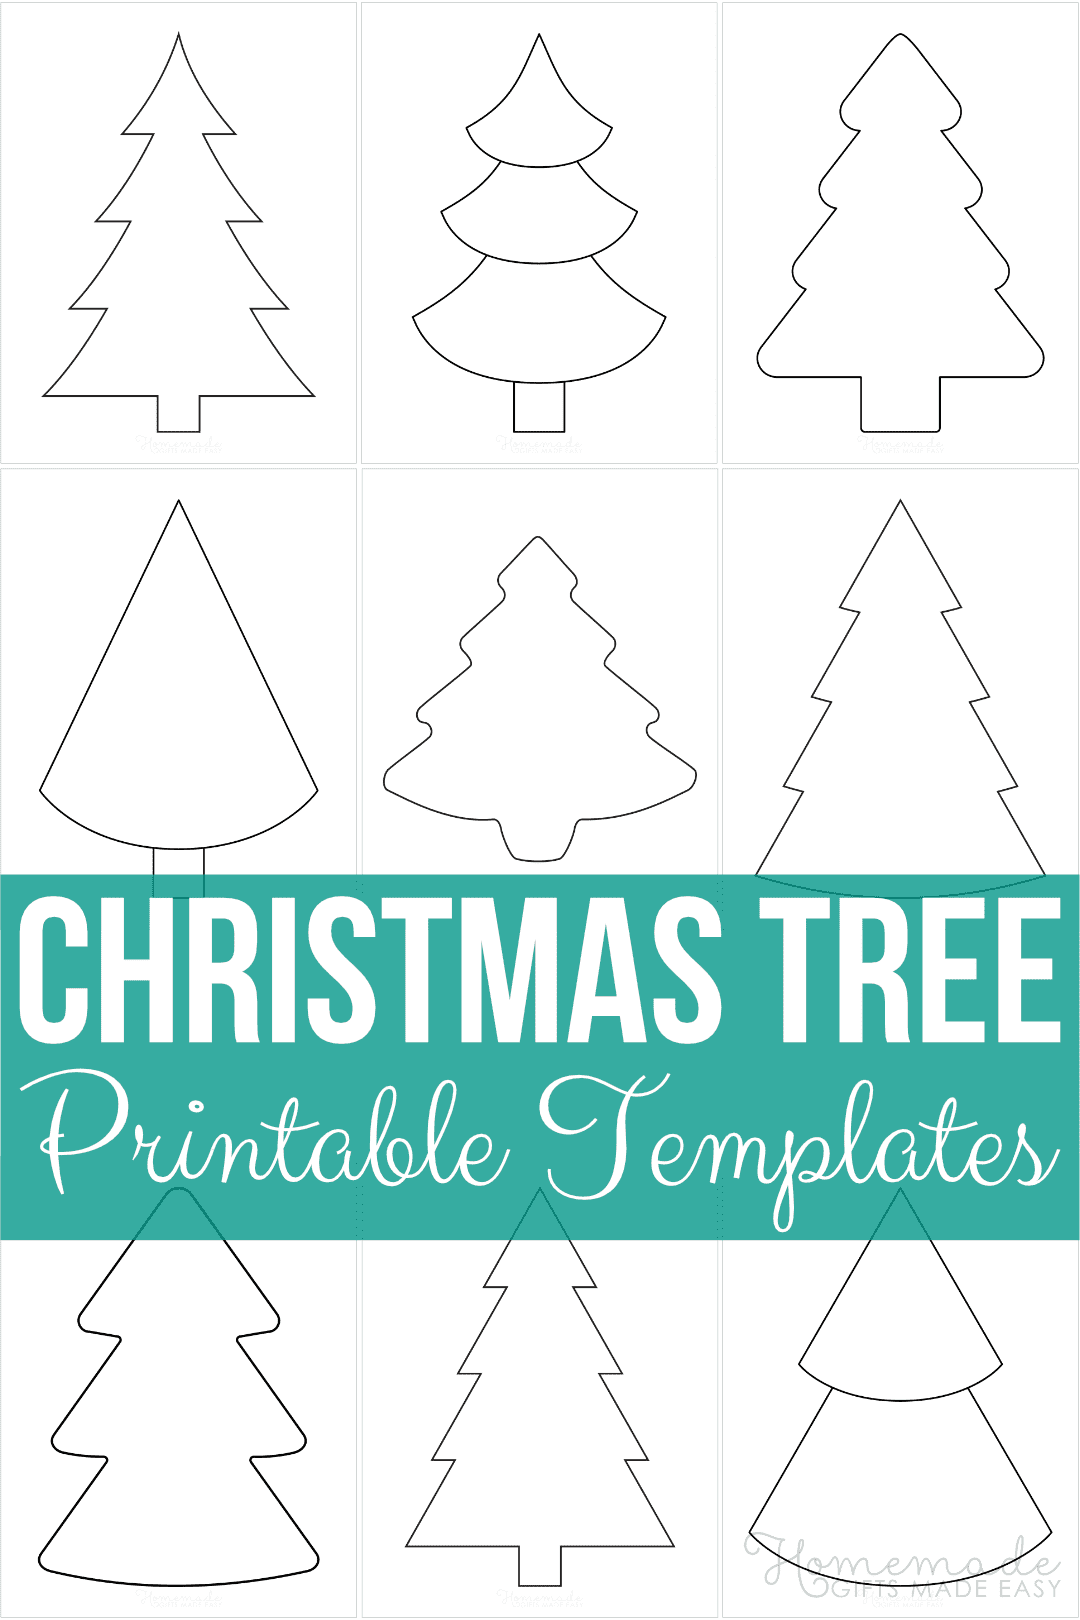 christmas-tree-templates-free-printable-outlines-patterns-in-all-shapes-sizes